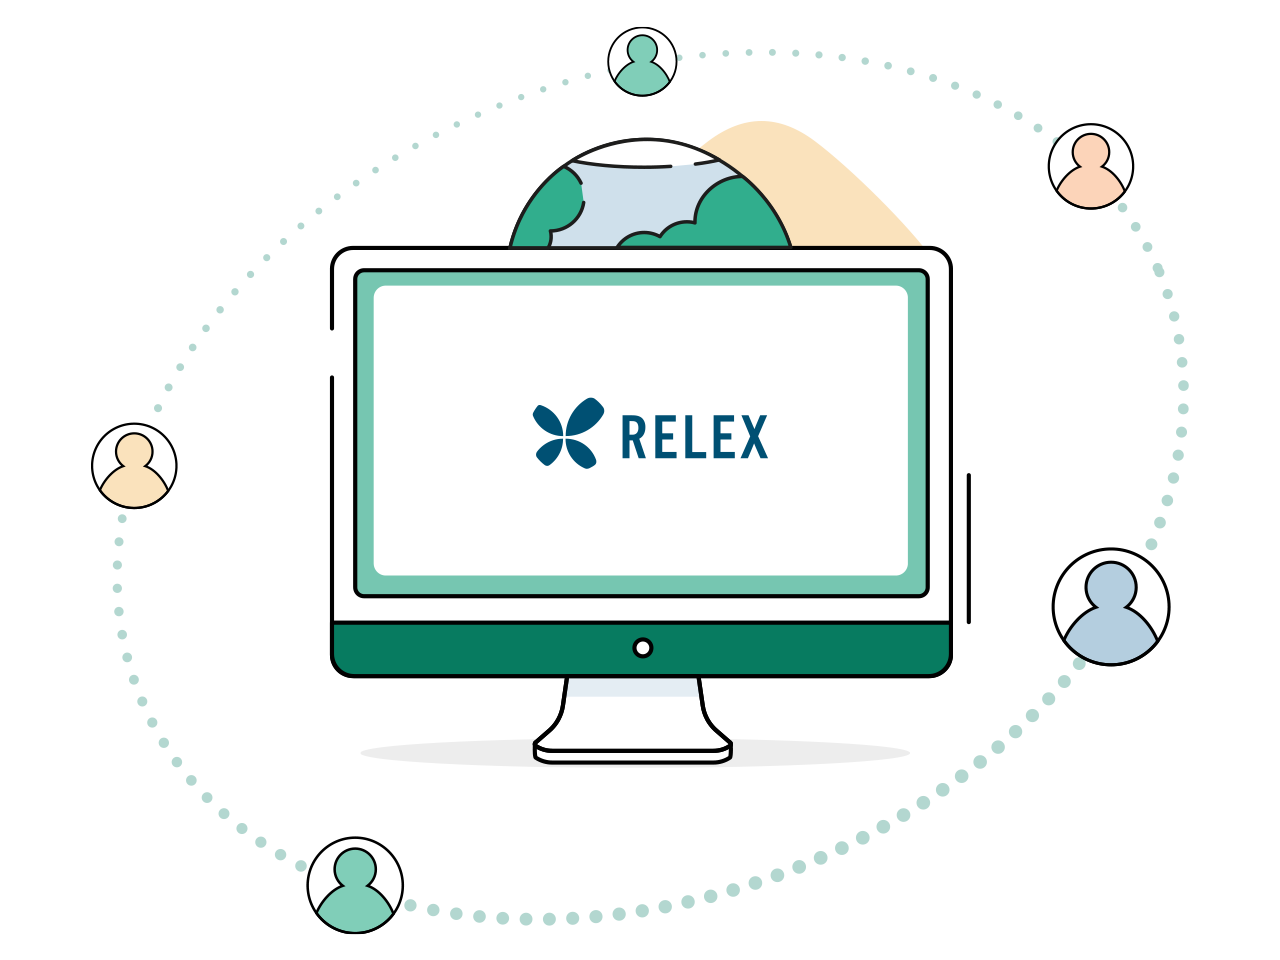 RELEX Partners PC with partner icons